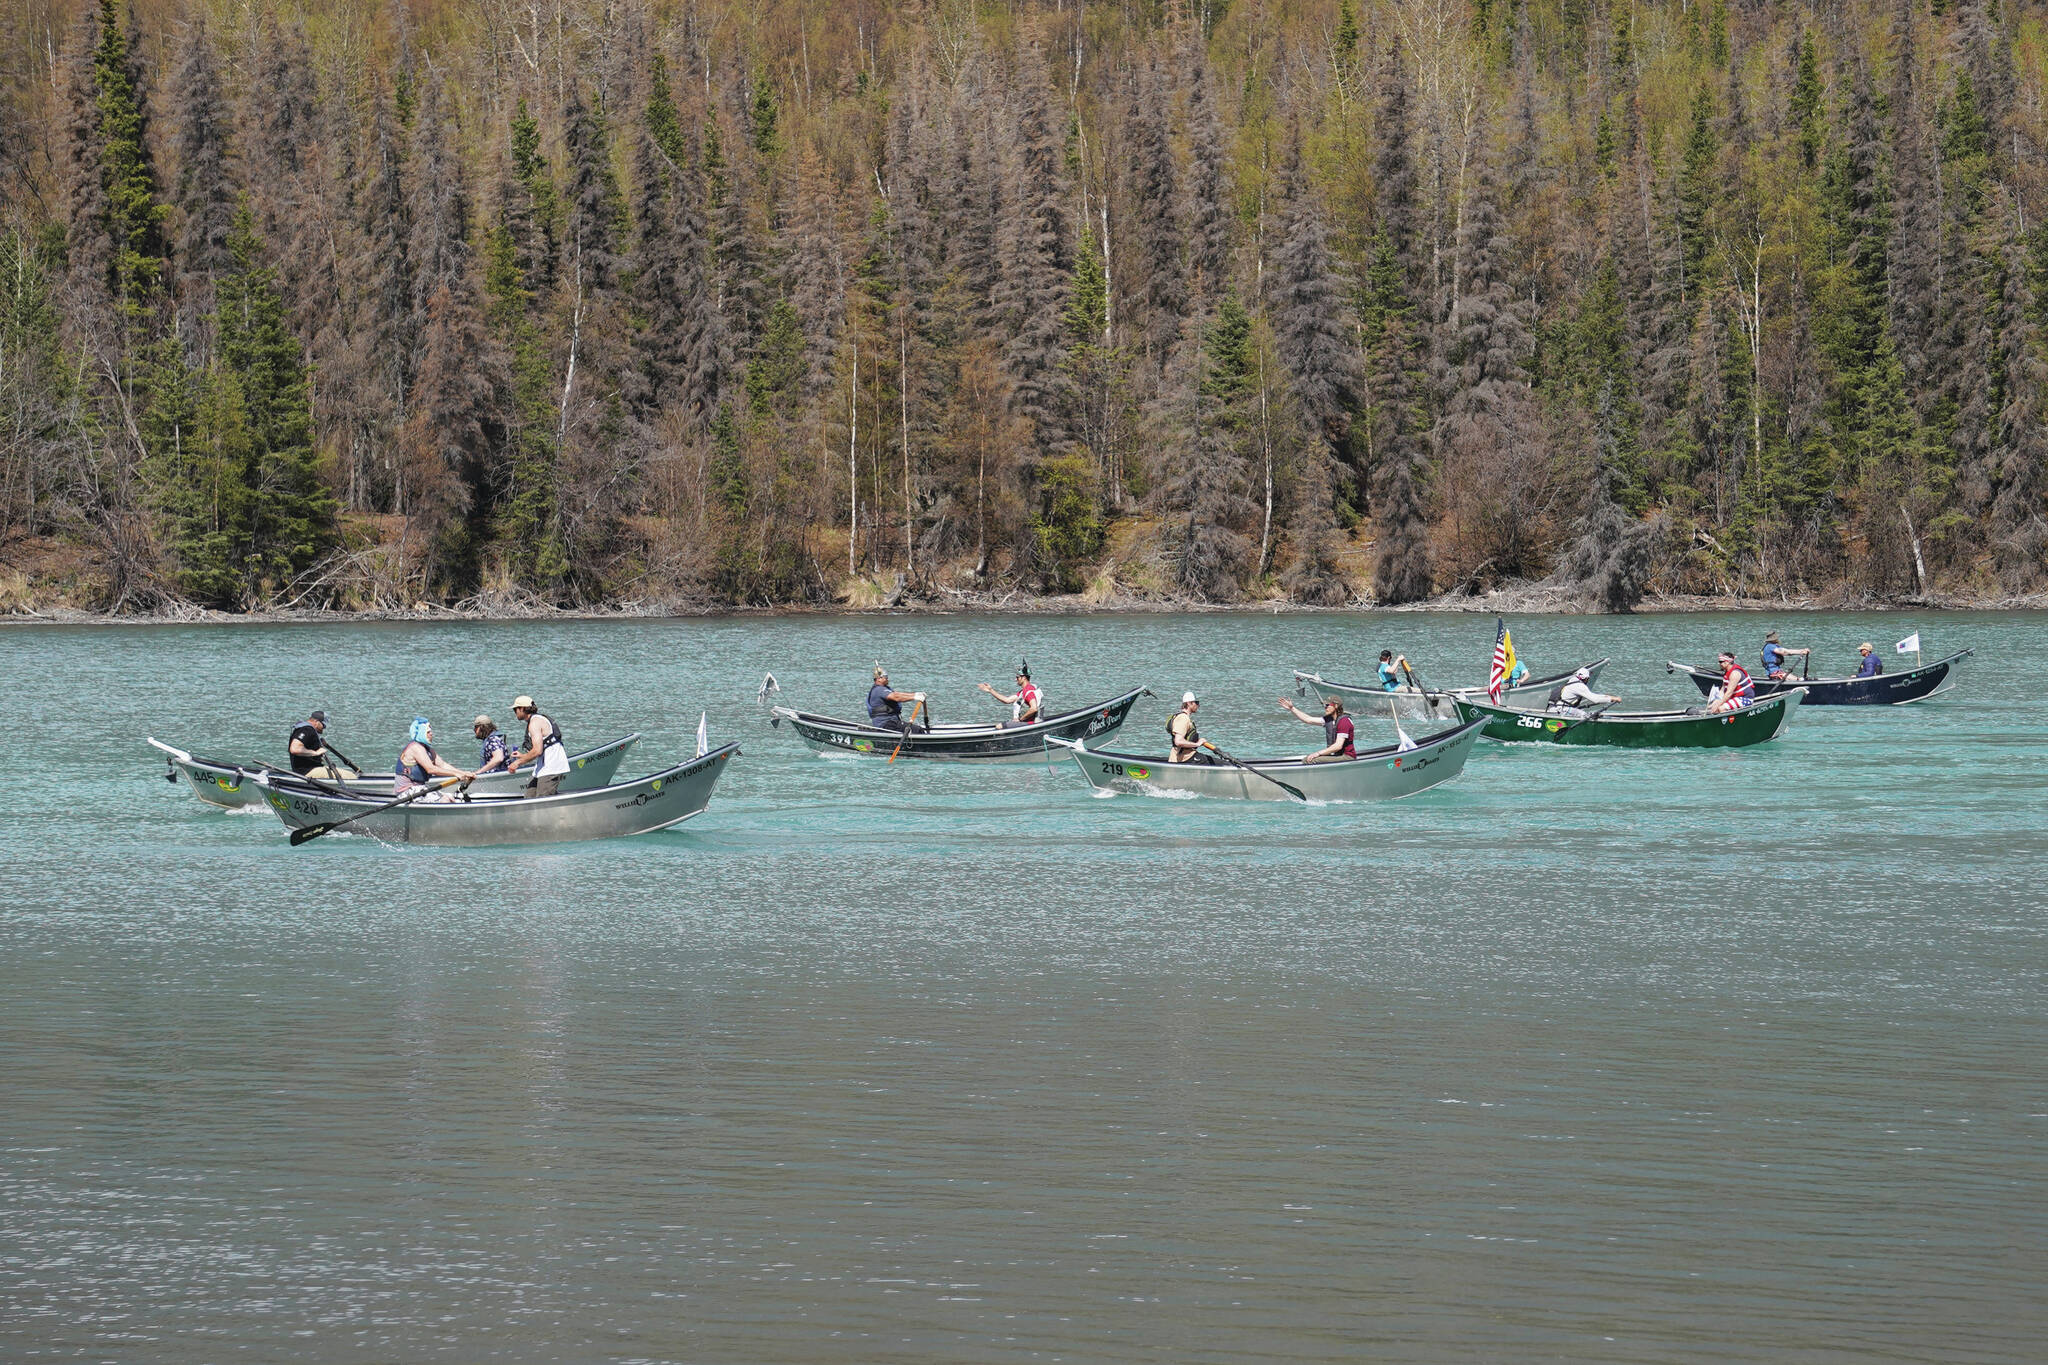 Contestants race down the Kenai River during the 16th Annual Cooper Landing Drift Boat Regata near the Eagle Landing Resort in Cooper Landing, Alaska, on Saturday, May 20, 2023. (Jake Dye/Peninsula Clarion)